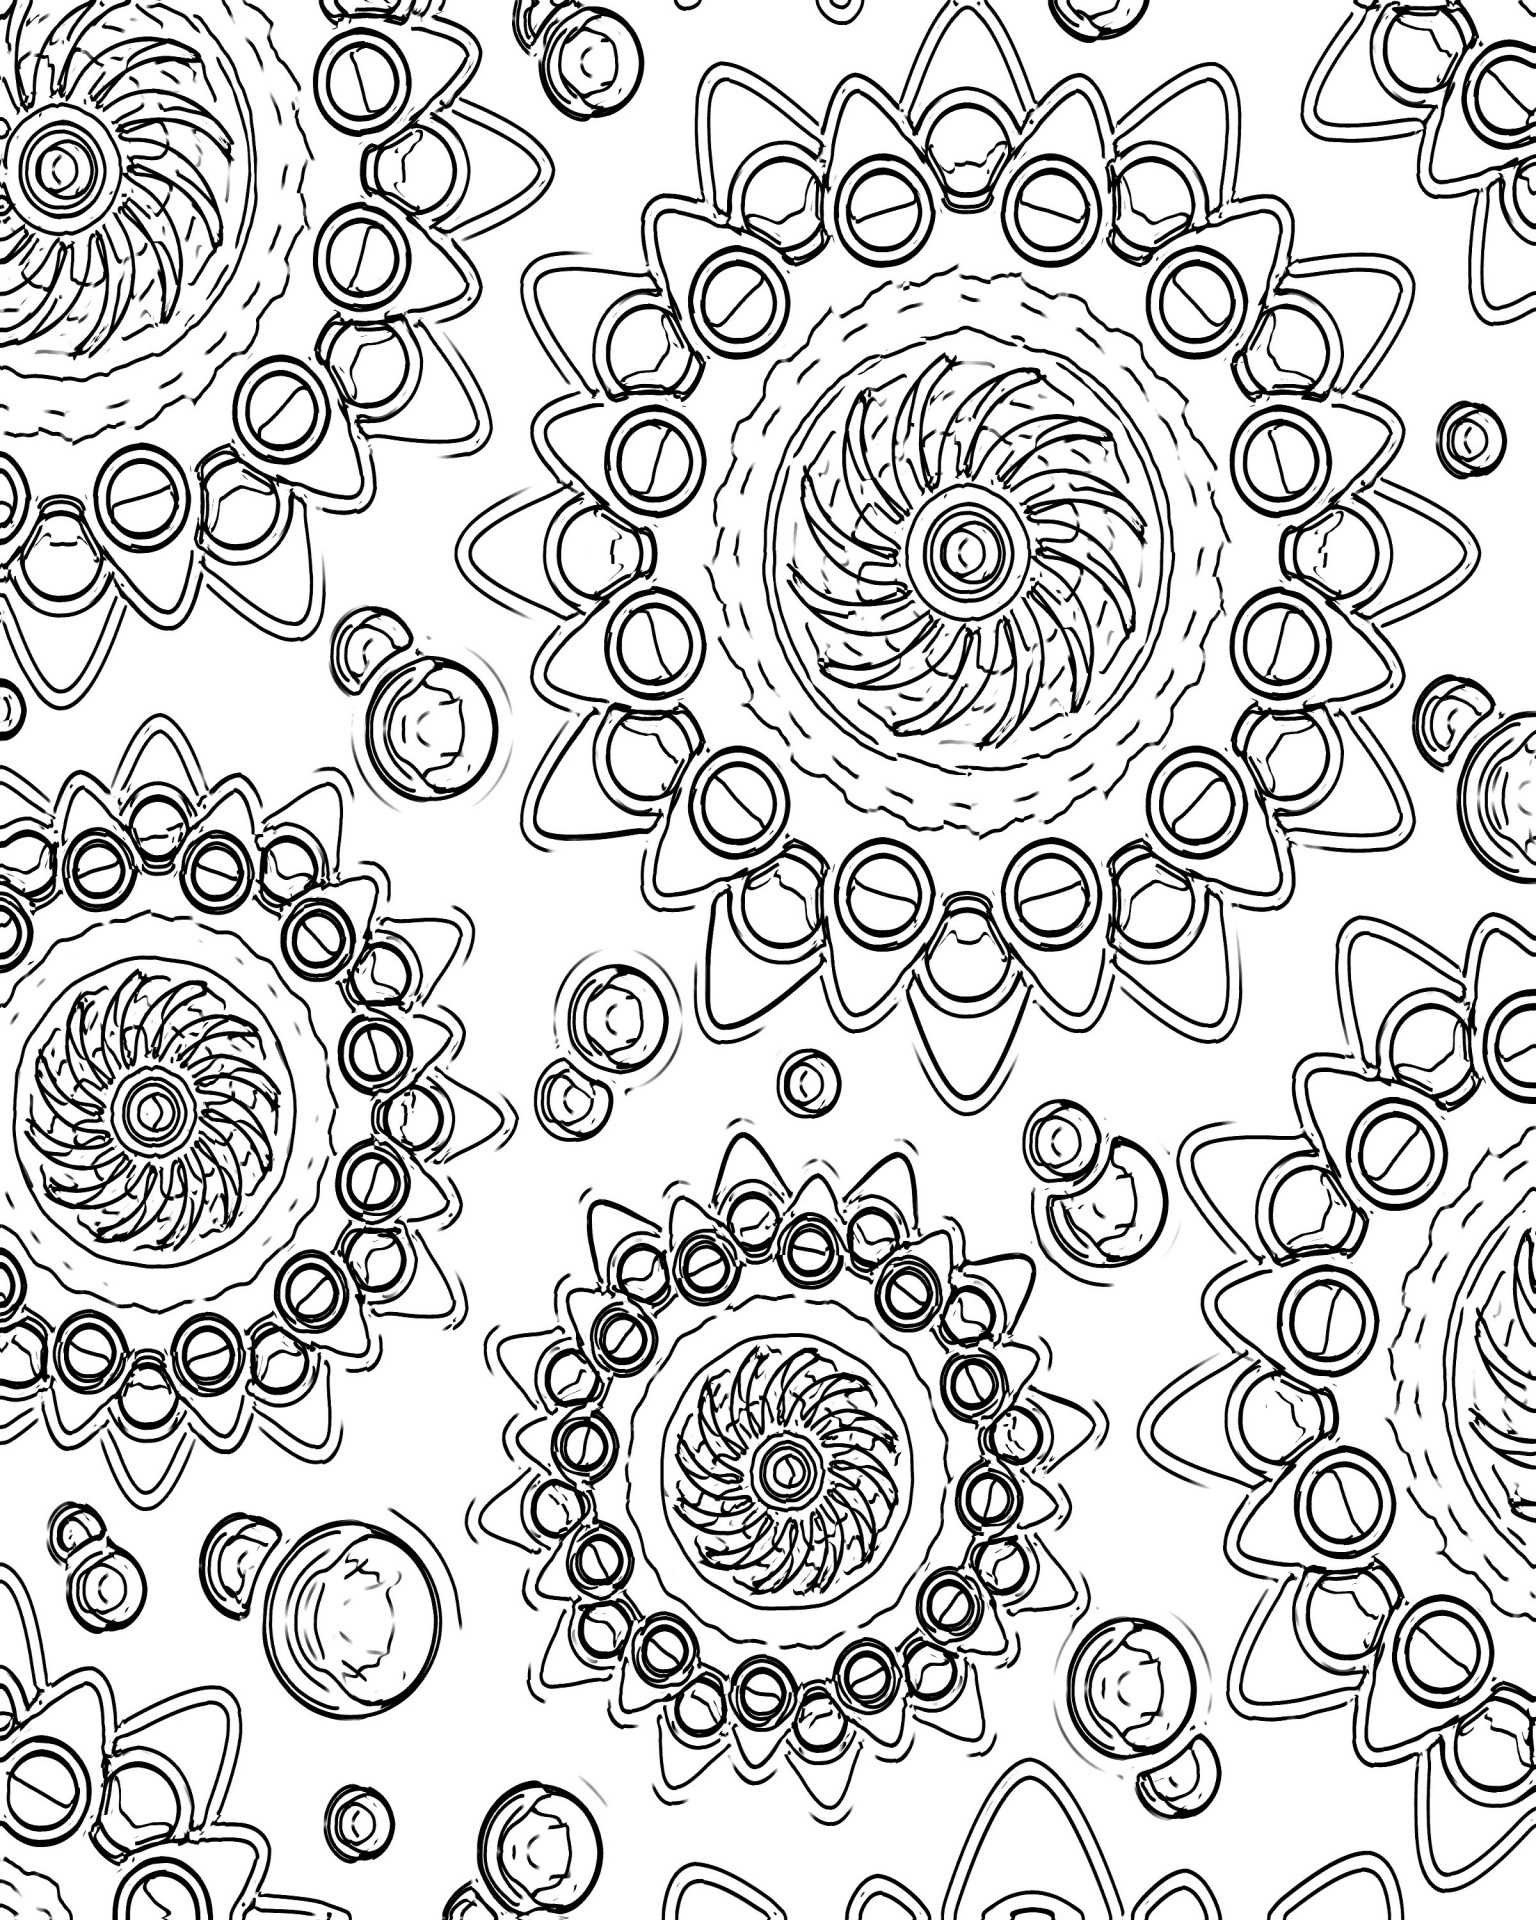 Colouring Page # 1 Free Stock Photo - Public Domain Pictures